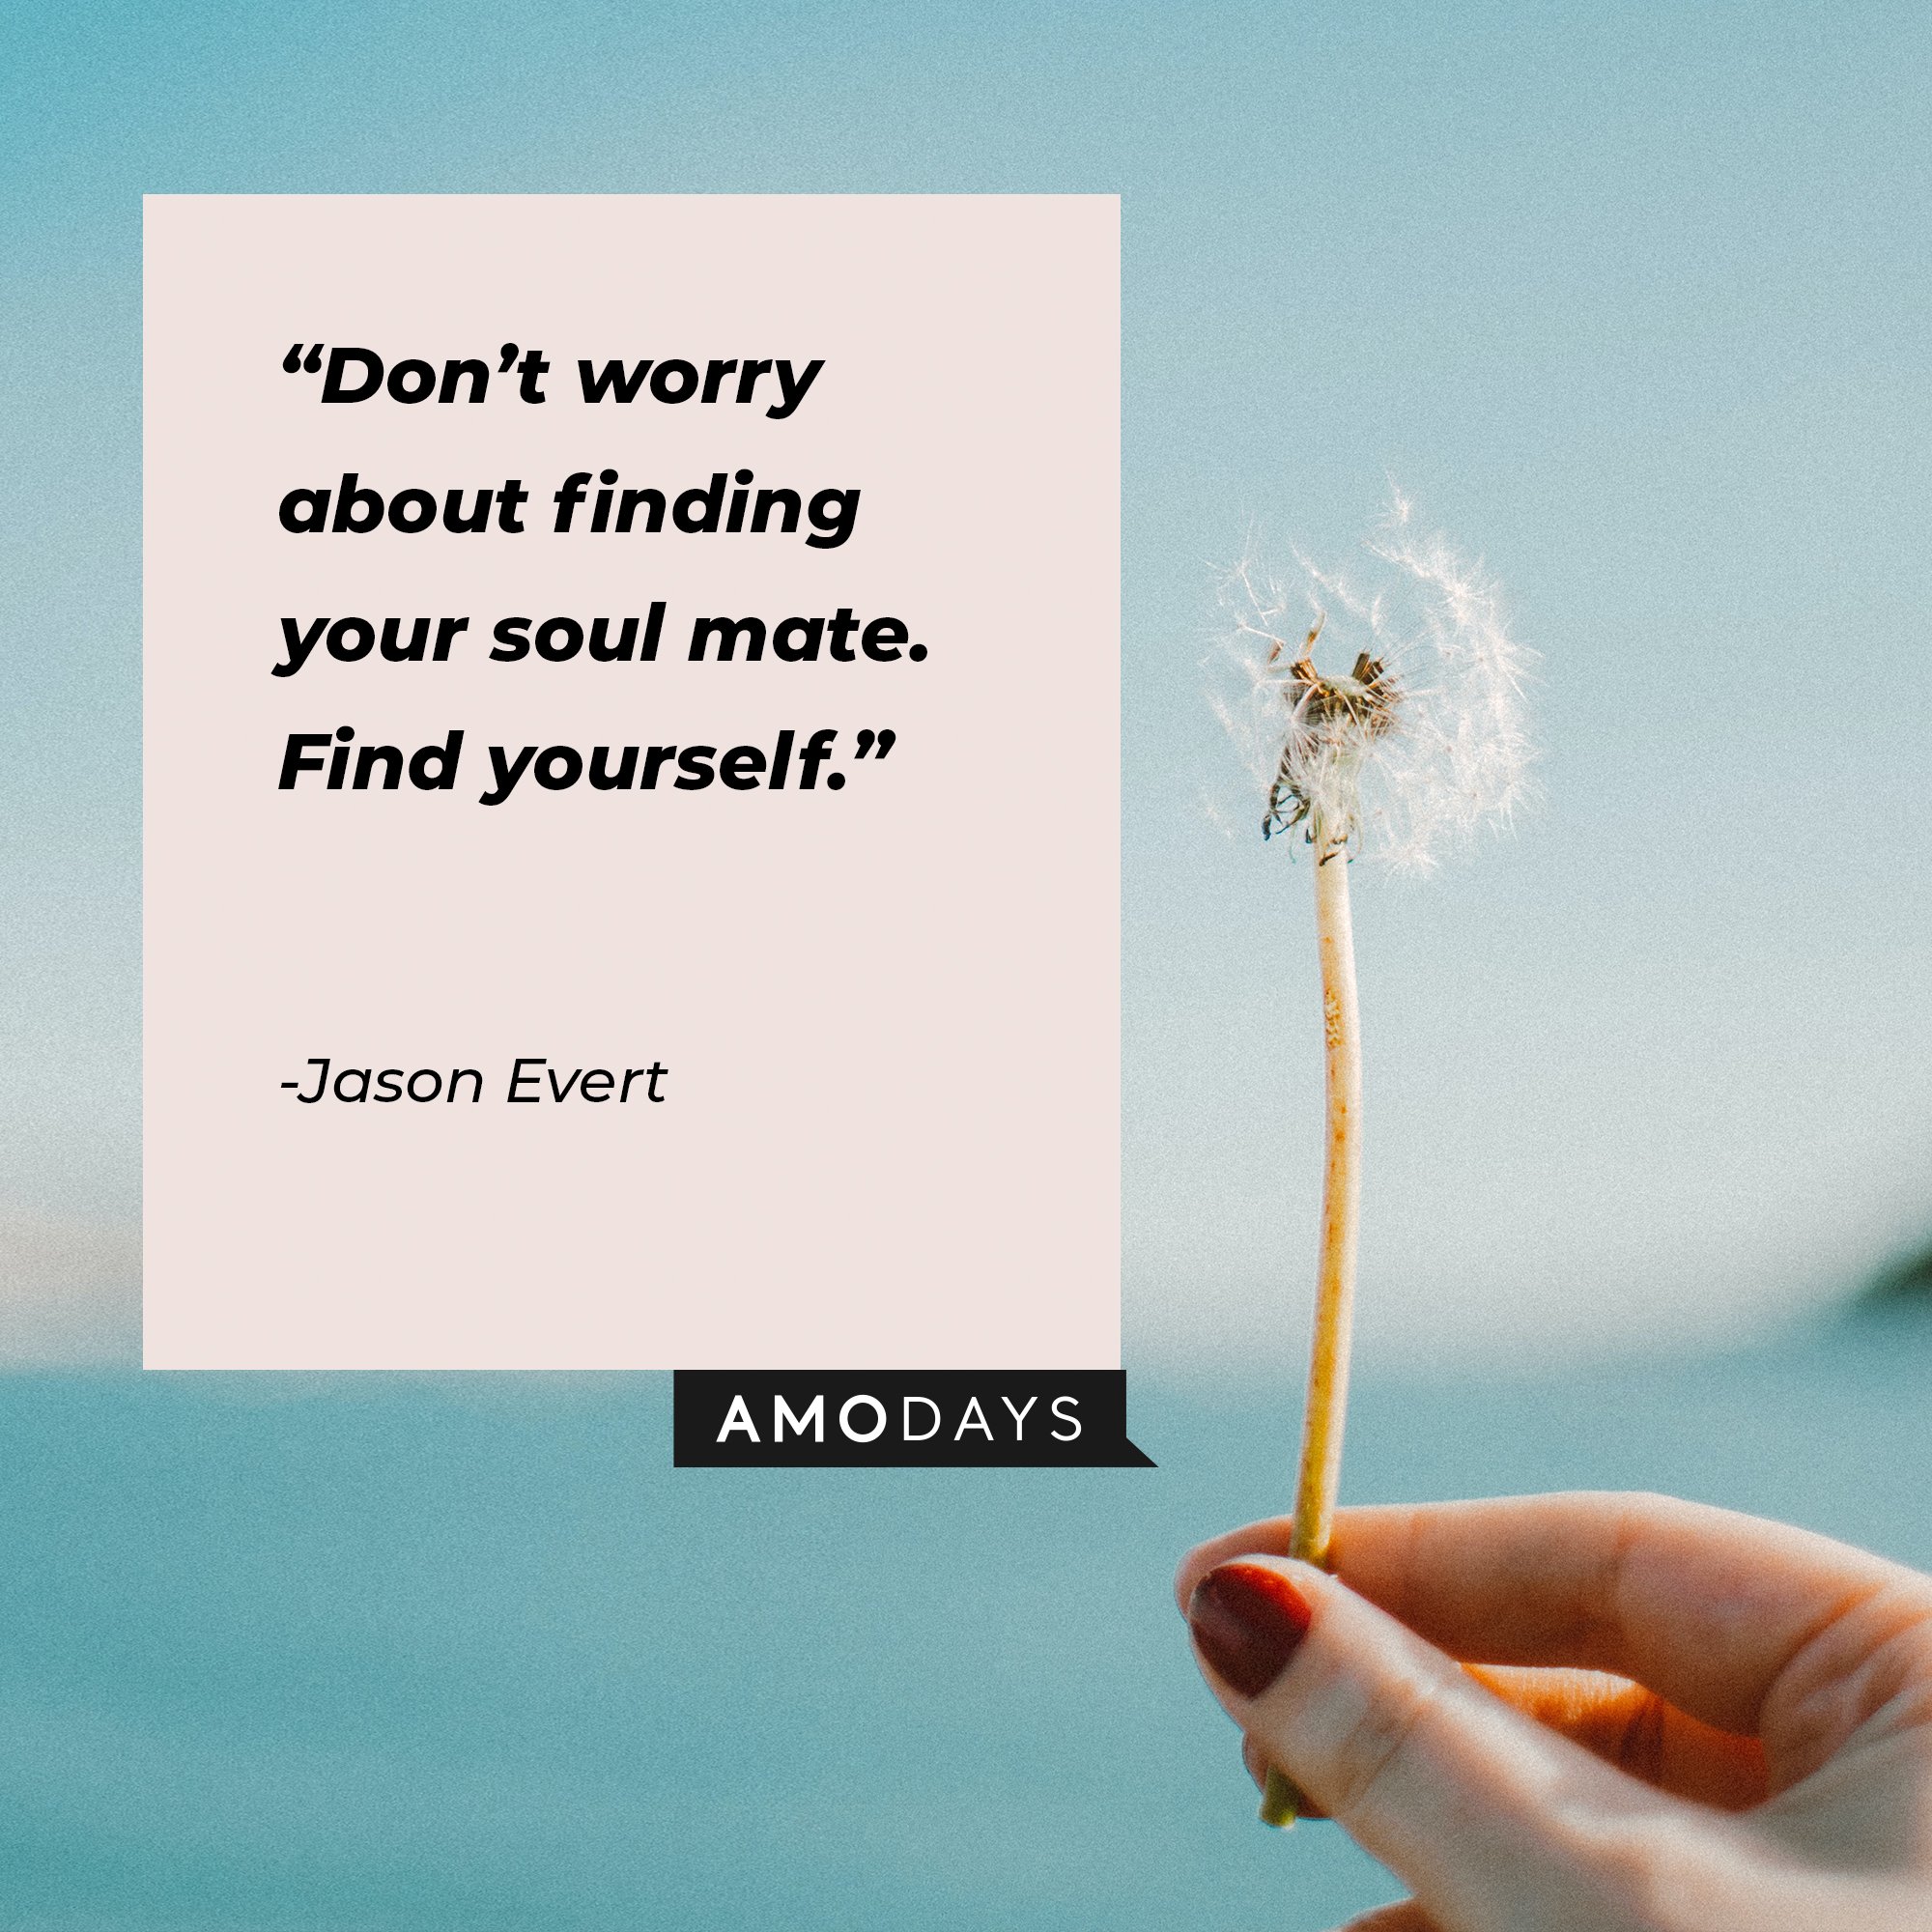 Jason Evert's quote: “Don’t worry about finding your soul mate. Find yourself."  | Image: AmoDays